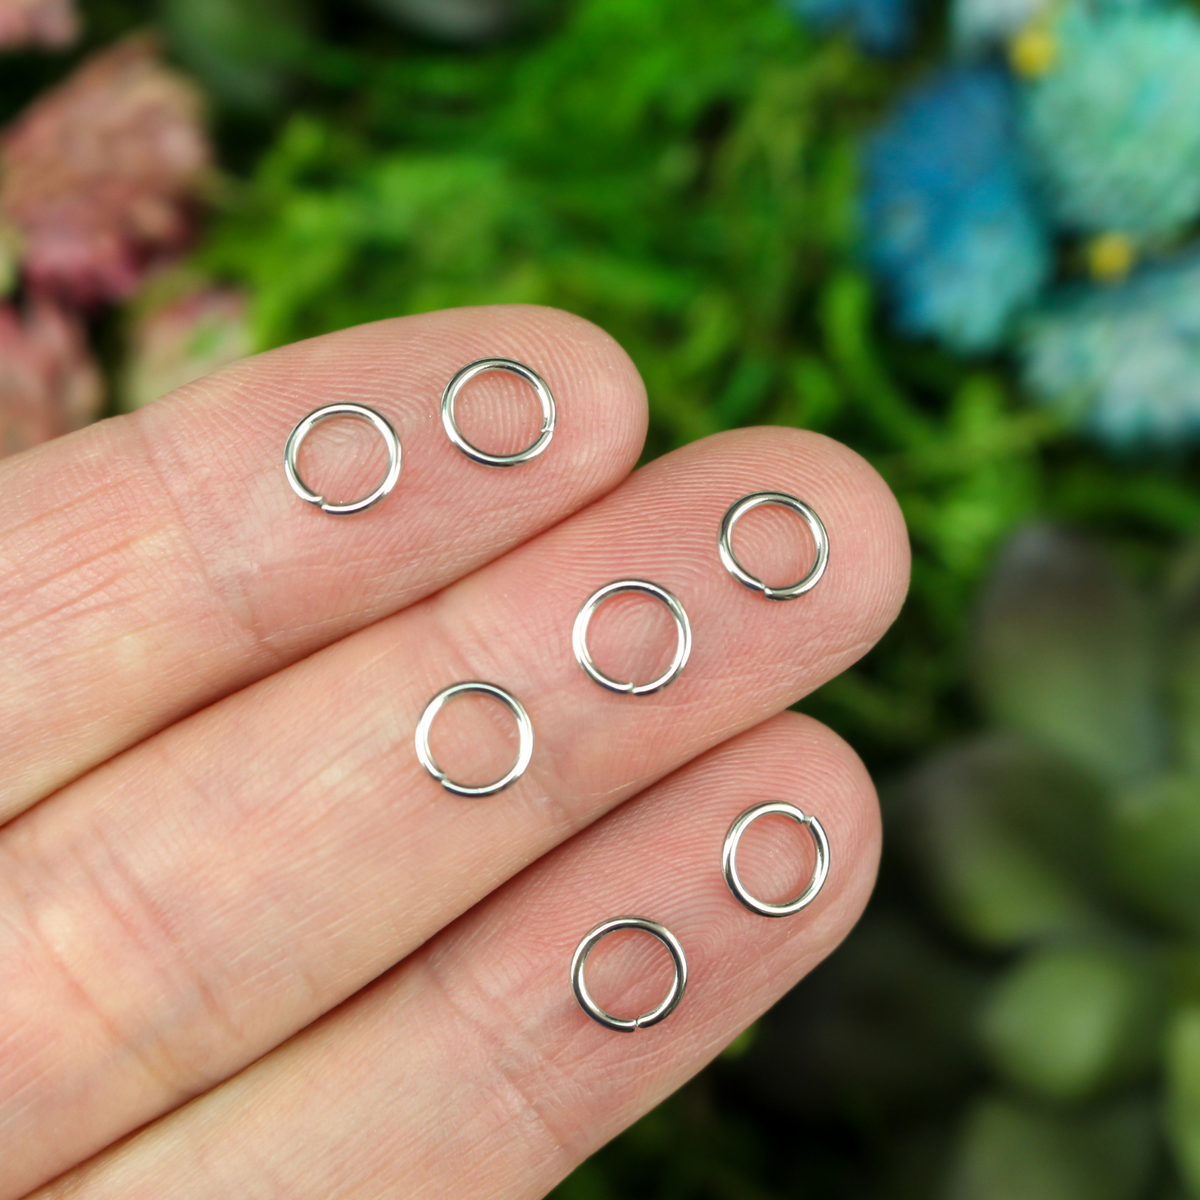 Stainless Steel 6mm Jump Rings  Jewelry Making Supplies Bulk – Small  Devotions